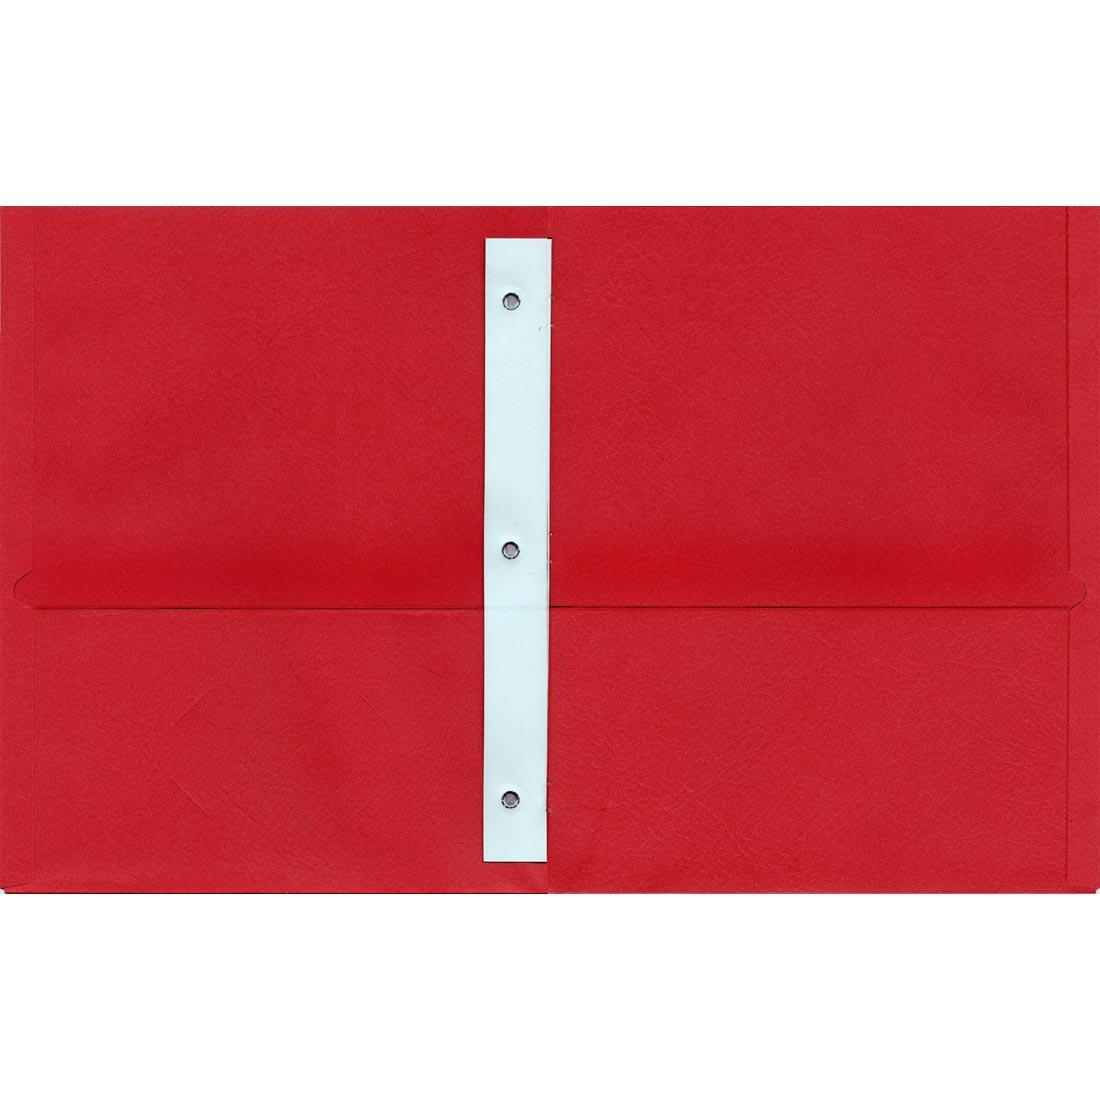 Red Oxford Twin Pocket Portfolio With Fasteners shown open